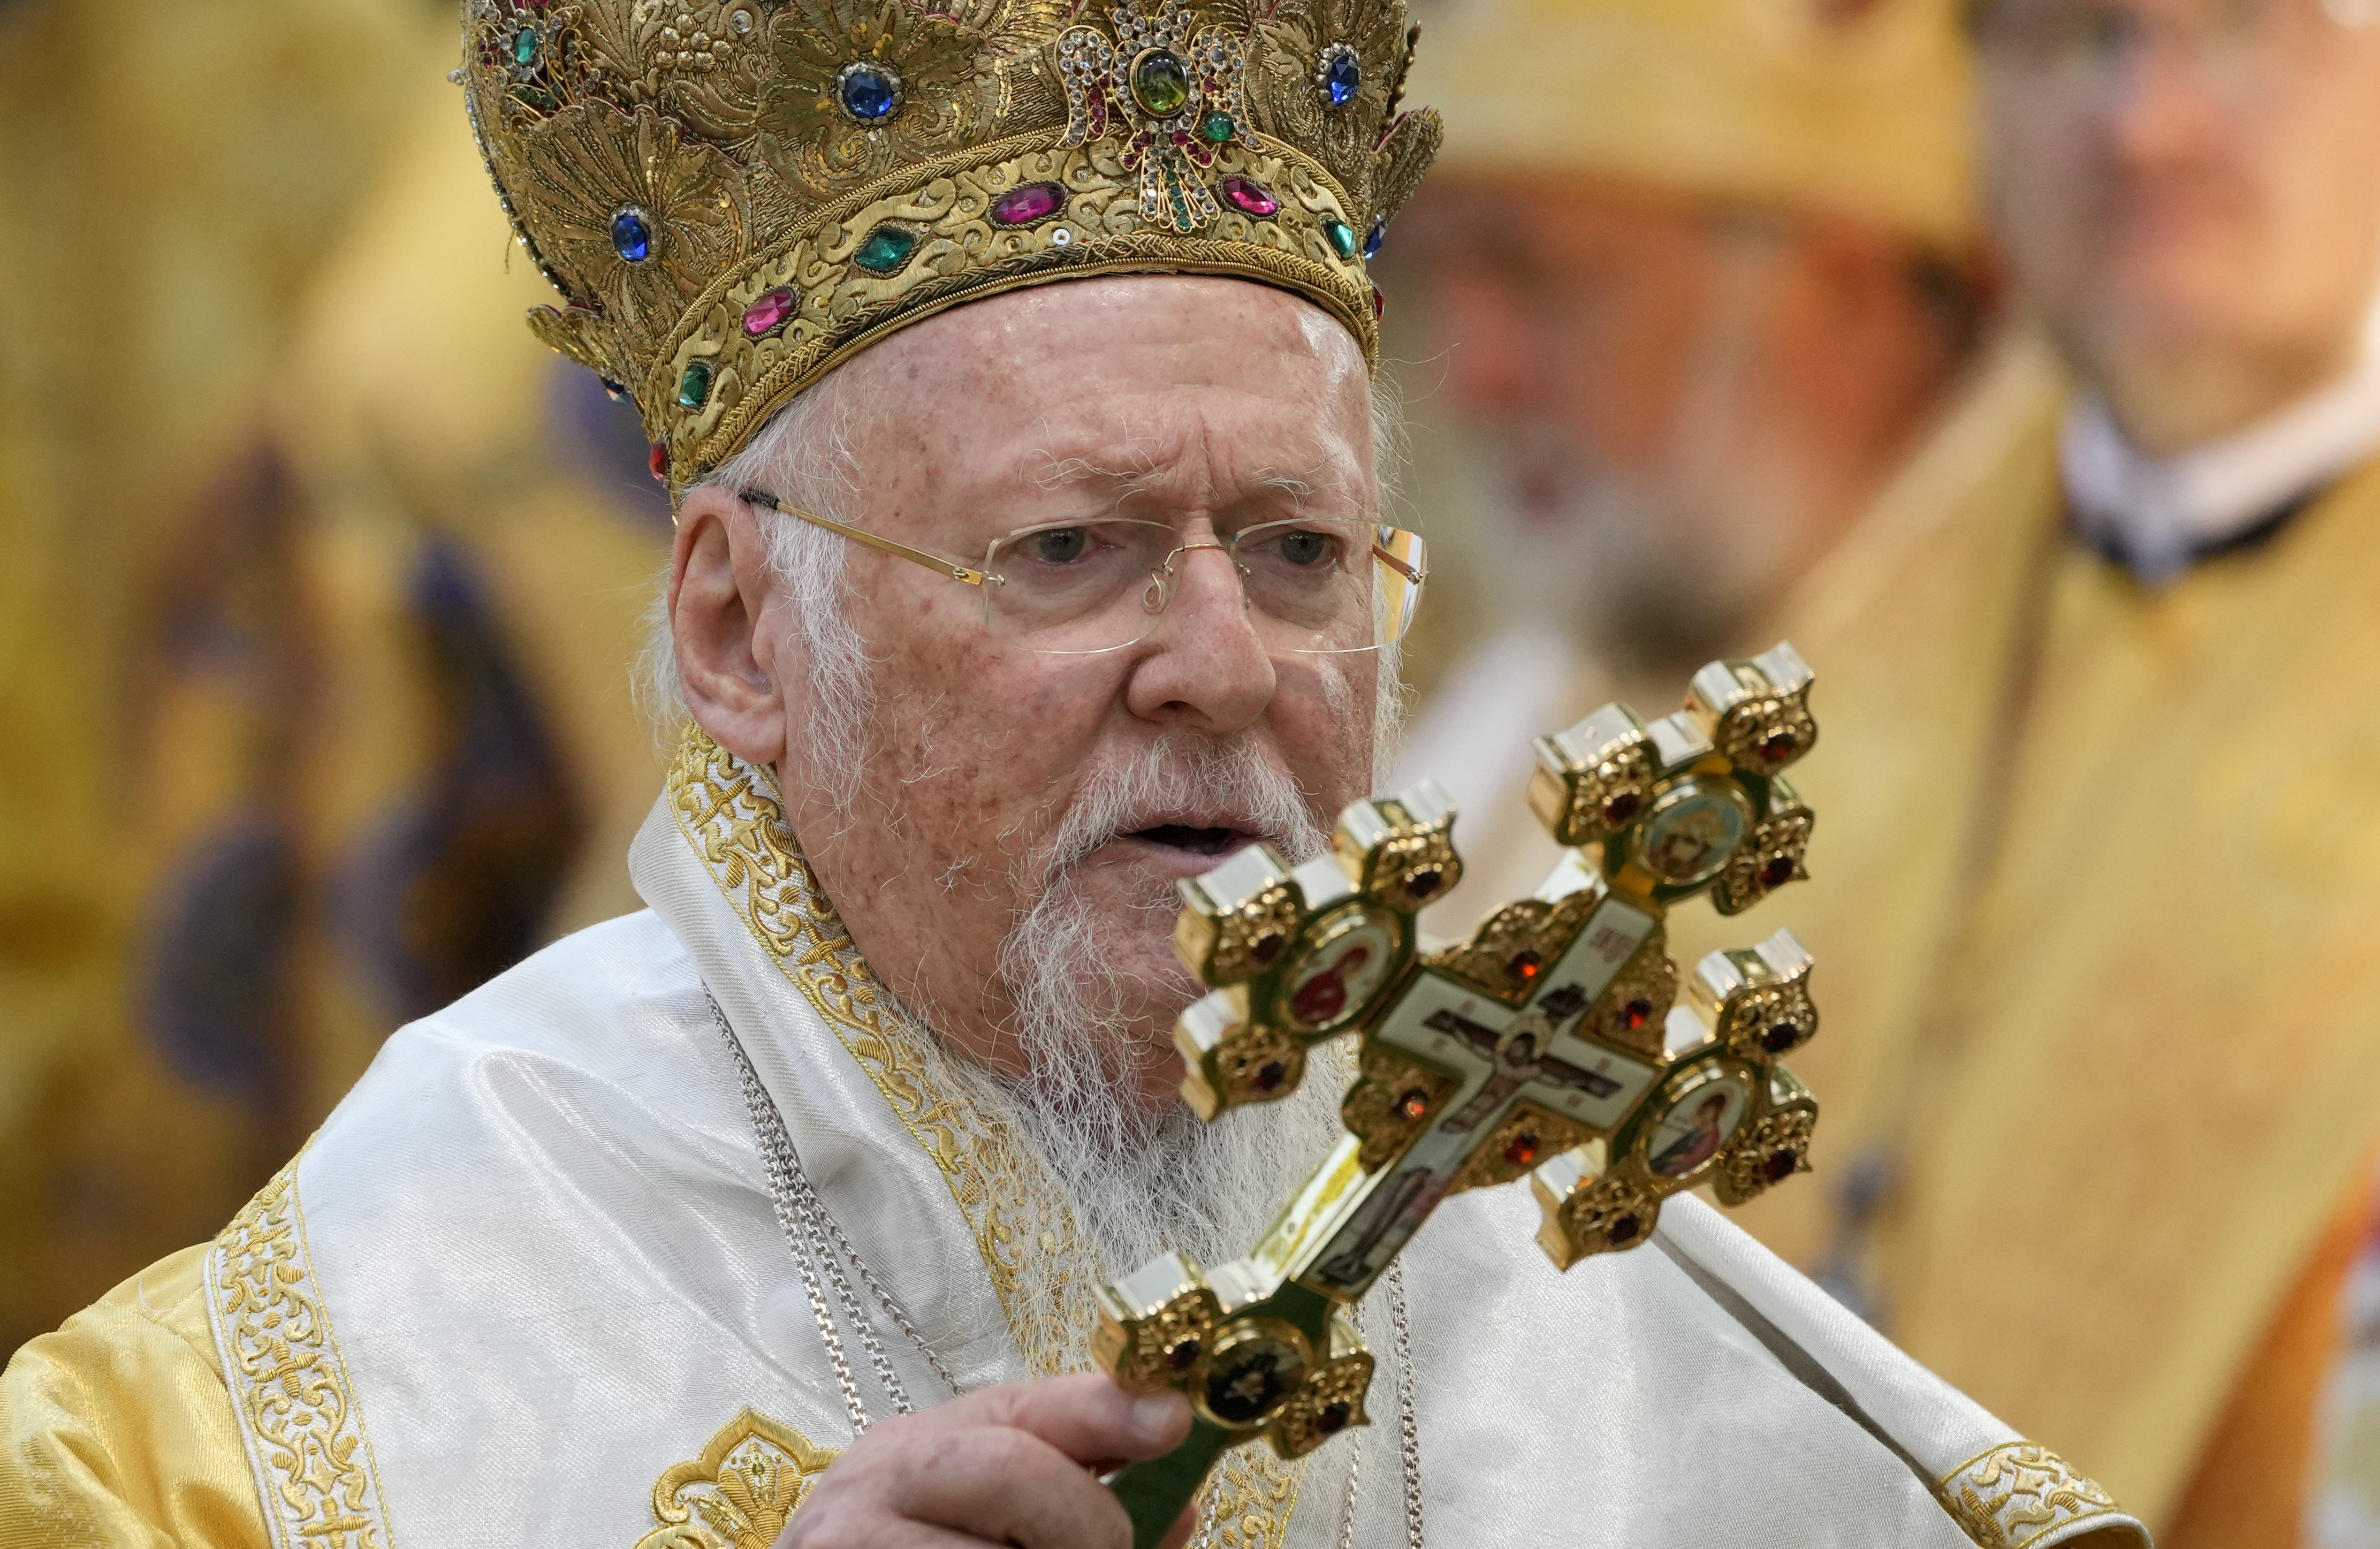 In this Sunday, Aug. 22, 2021 photo, Ecumenical Patriarch Bartholomew I, the spiritual leader of the world's Orthodox Christians, leads a Mass at the St. Sofia Cathedral in Kyiv, Ukraine. (AP Photo/Efrem Lukatsky)